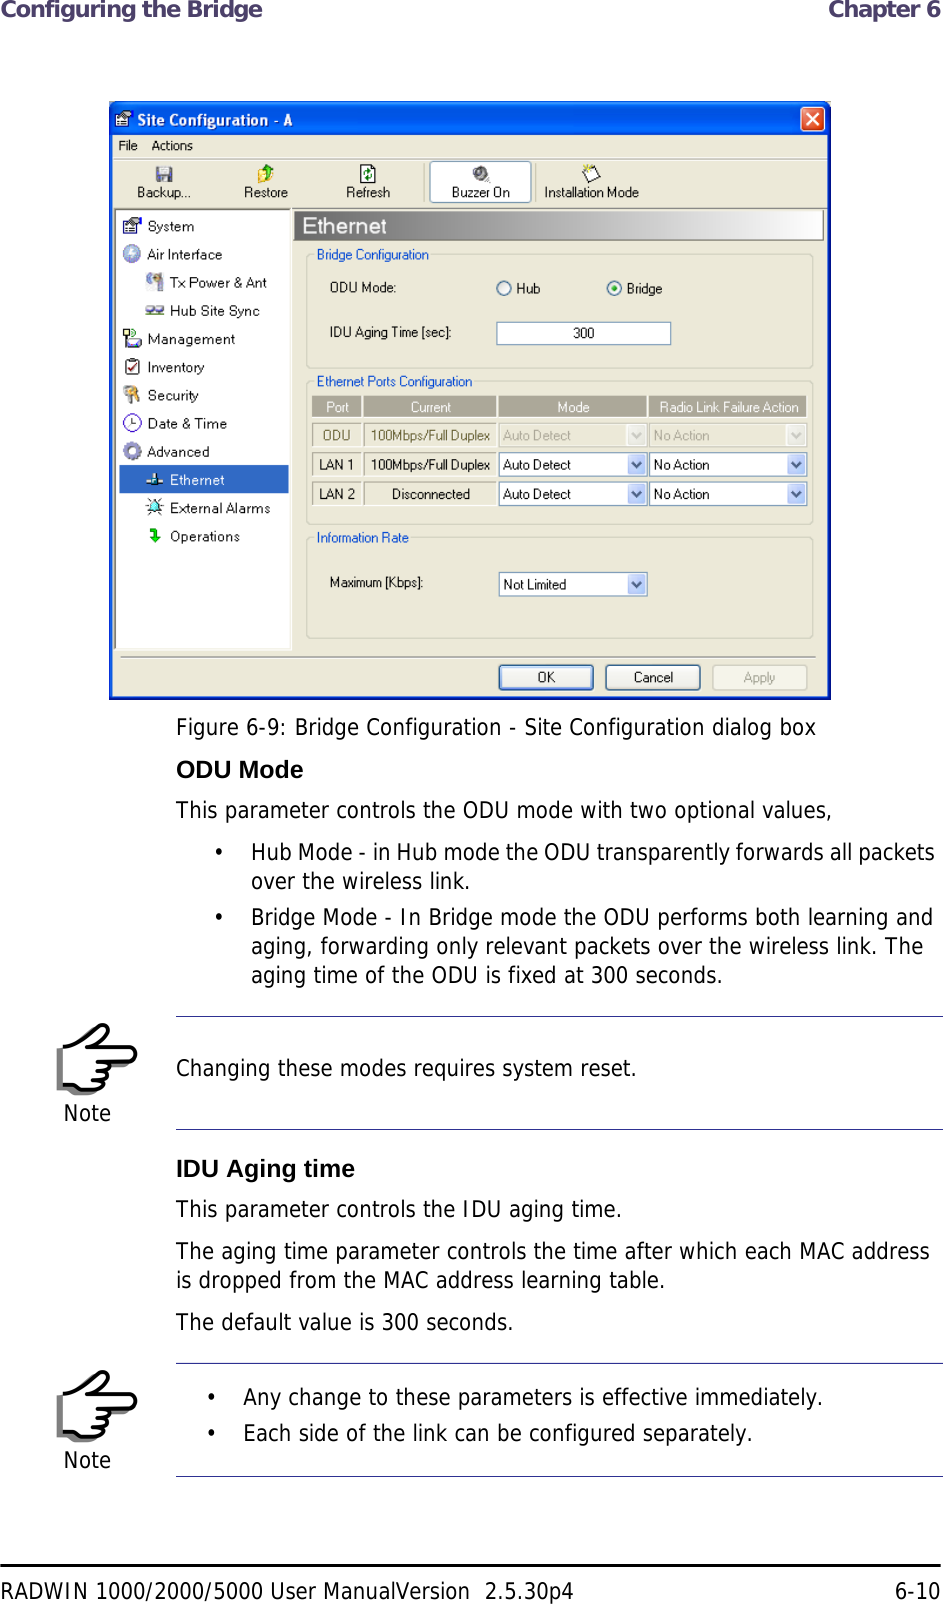 Configuring the Bridge  Chapter 6RADWIN 1000/2000/5000 User ManualVersion  2.5.30p4 6-10Figure 6-9: Bridge Configuration - Site Configuration dialog boxODU ModeThis parameter controls the ODU mode with two optional values, • Hub Mode - in Hub mode the ODU transparently forwards all packets over the wireless link.• Bridge Mode - In Bridge mode the ODU performs both learning and aging, forwarding only relevant packets over the wireless link. The aging time of the ODU is fixed at 300 seconds.IDU Aging timeThis parameter controls the IDU aging time.The aging time parameter controls the time after which each MAC address is dropped from the MAC address learning table.The default value is 300 seconds.NoteChanging these modes requires system reset.Note• Any change to these parameters is effective immediately.• Each side of the link can be configured separately.